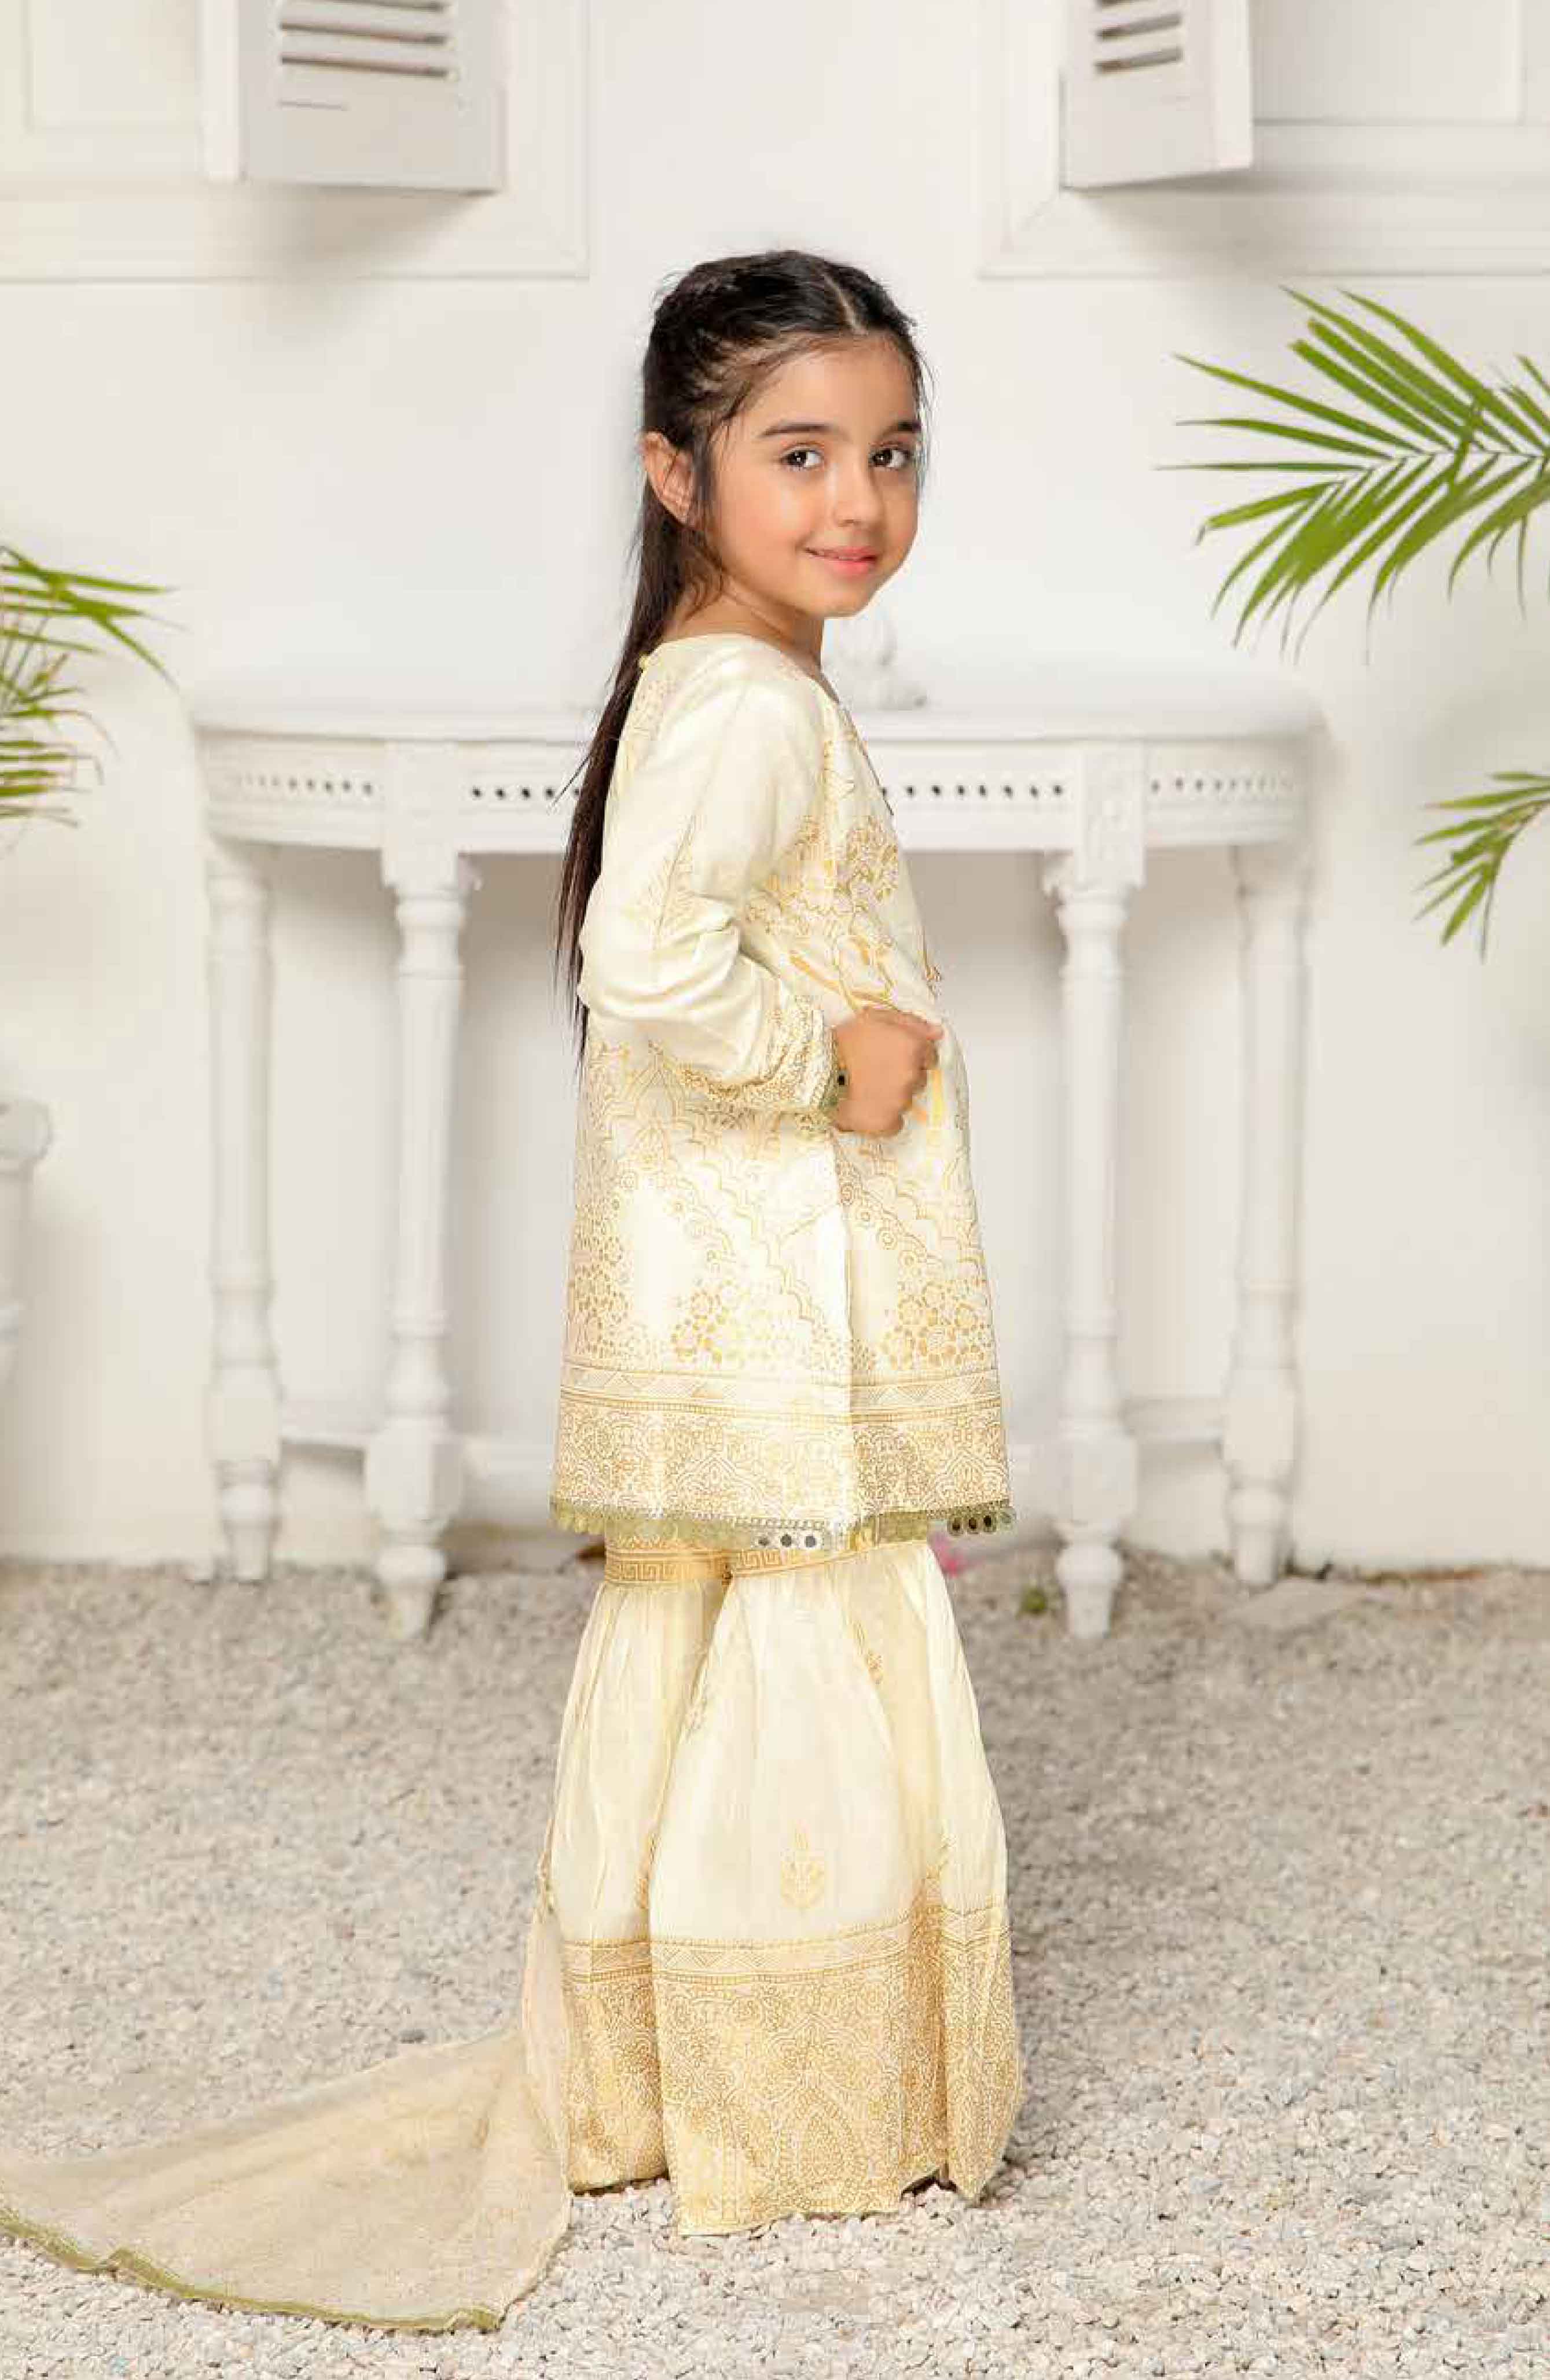 Simrans Girls Mummy & Me Eid Outfit with Gharara Trousers S2015CK DesiP 